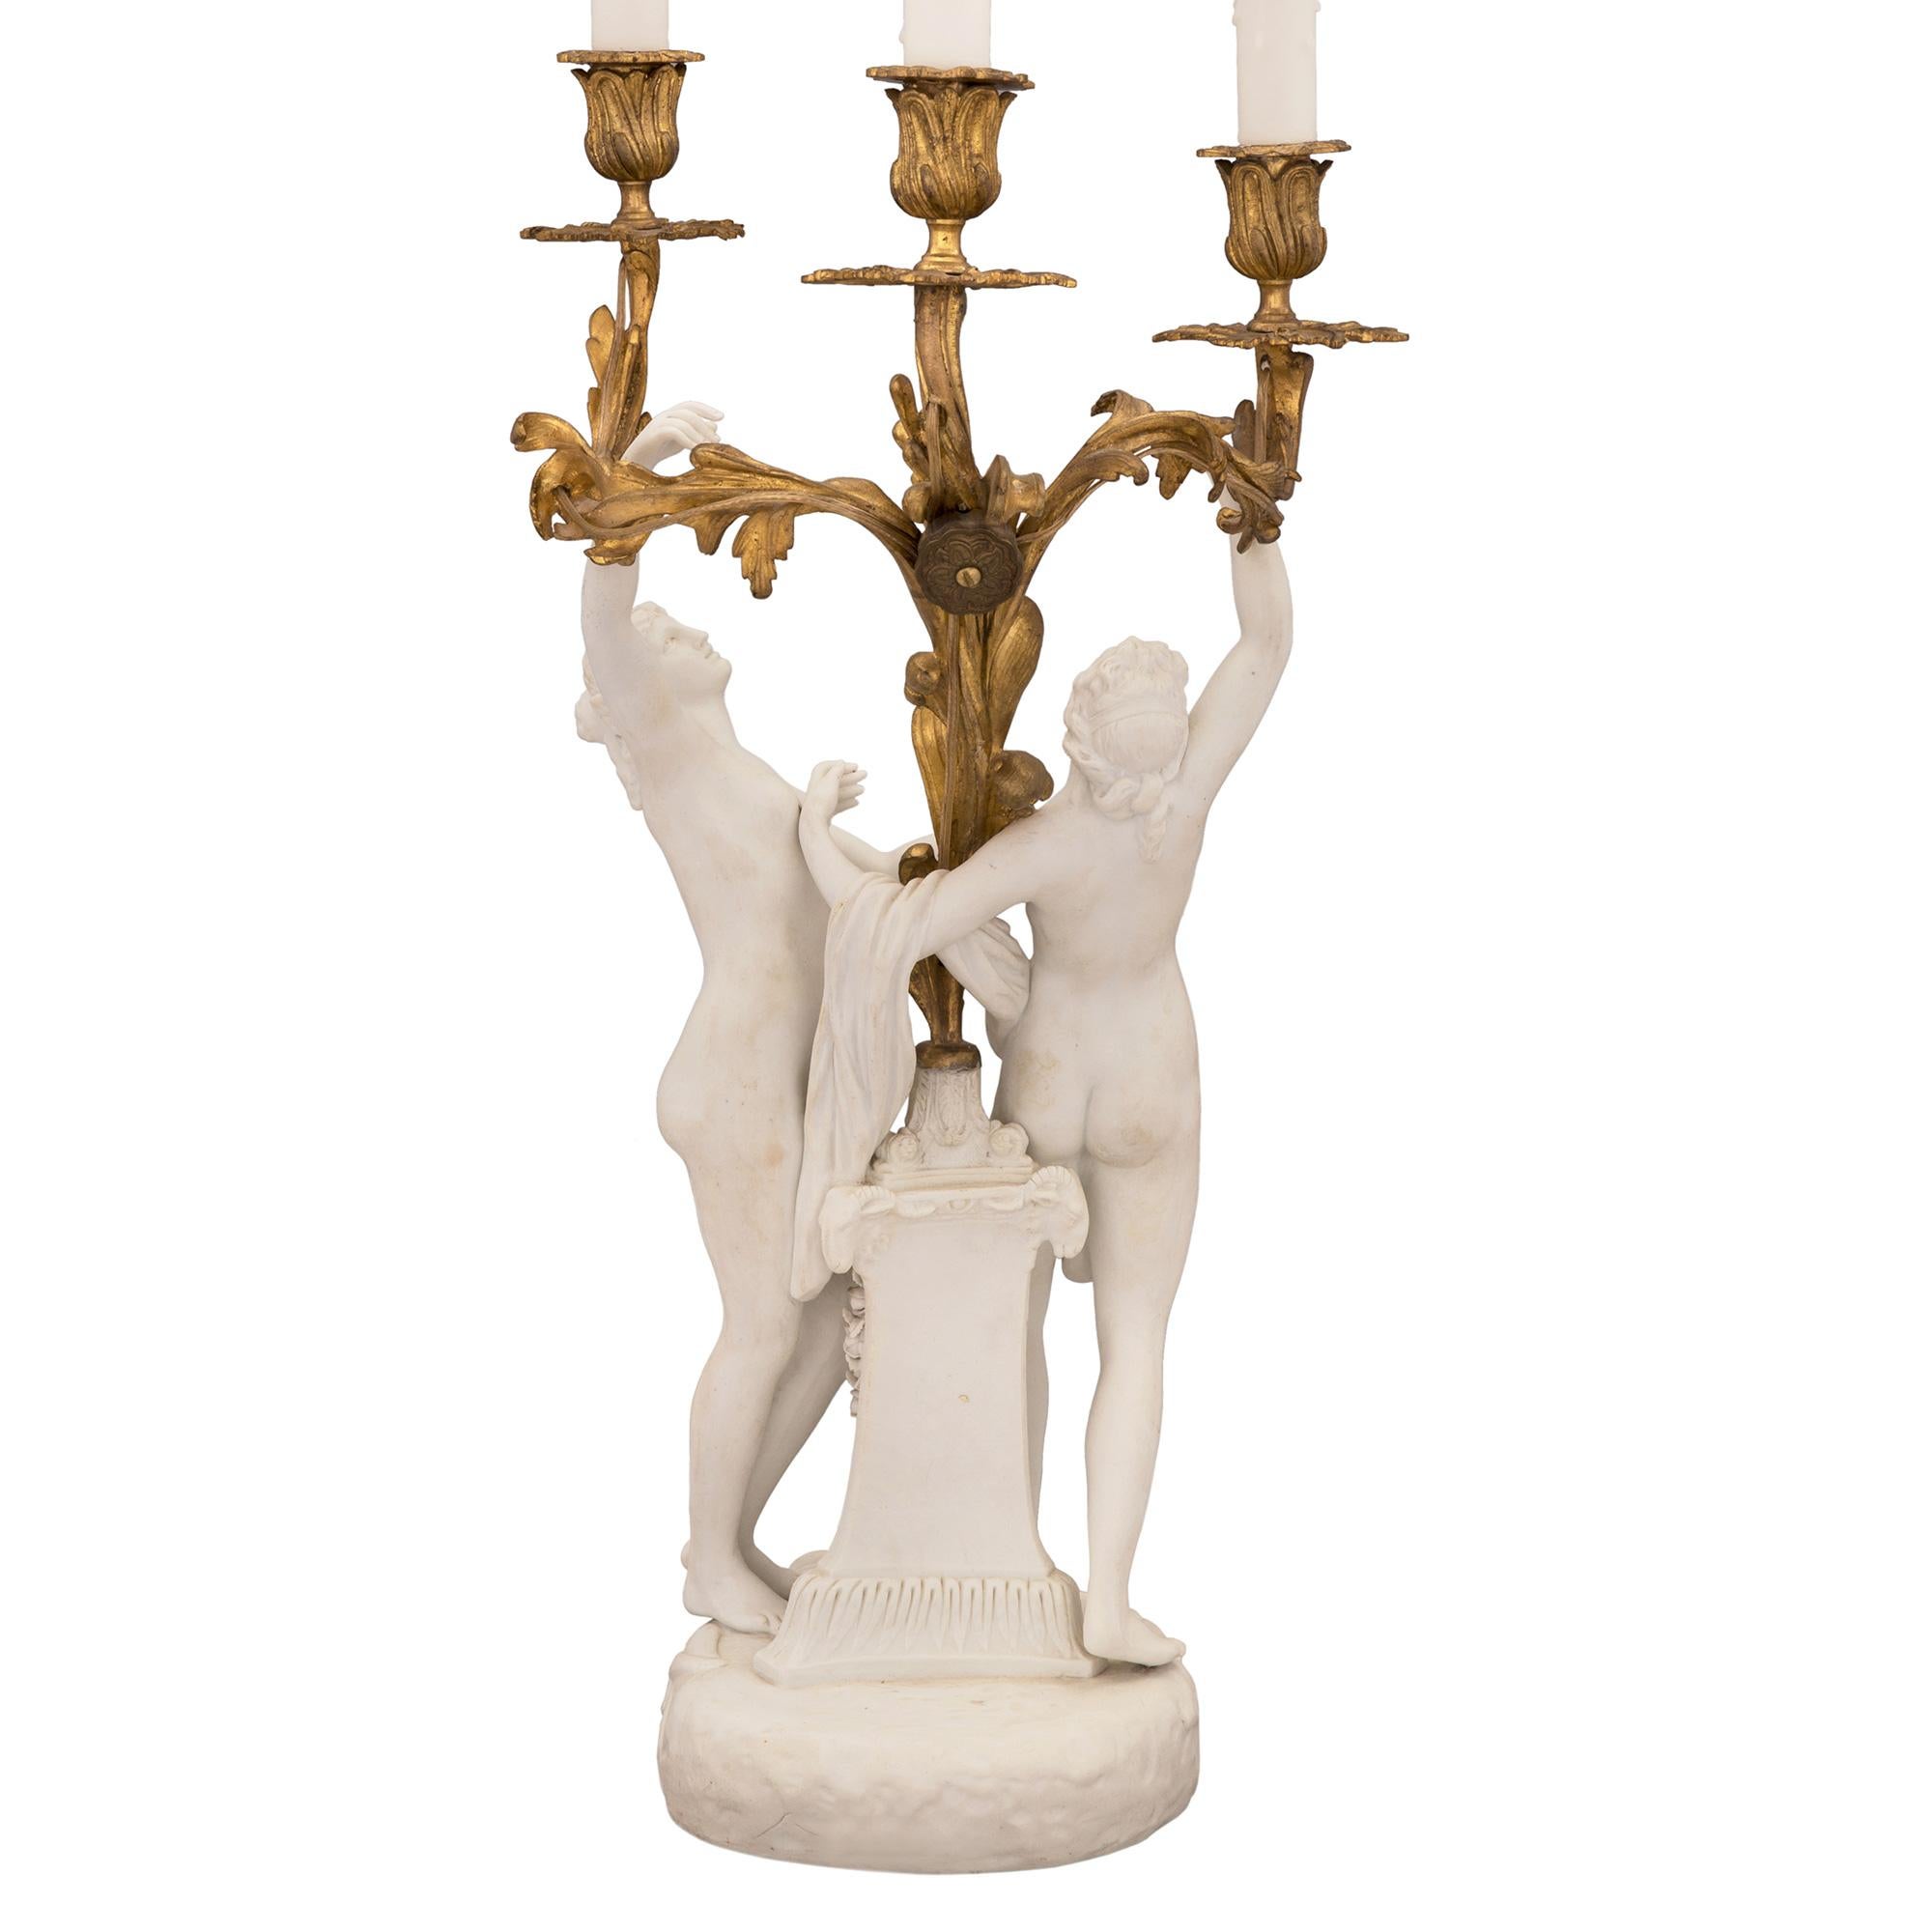 Pair of French 19th Century Louis XV Style Candelabra Lamps, Signed Sèvres In Good Condition For Sale In West Palm Beach, FL